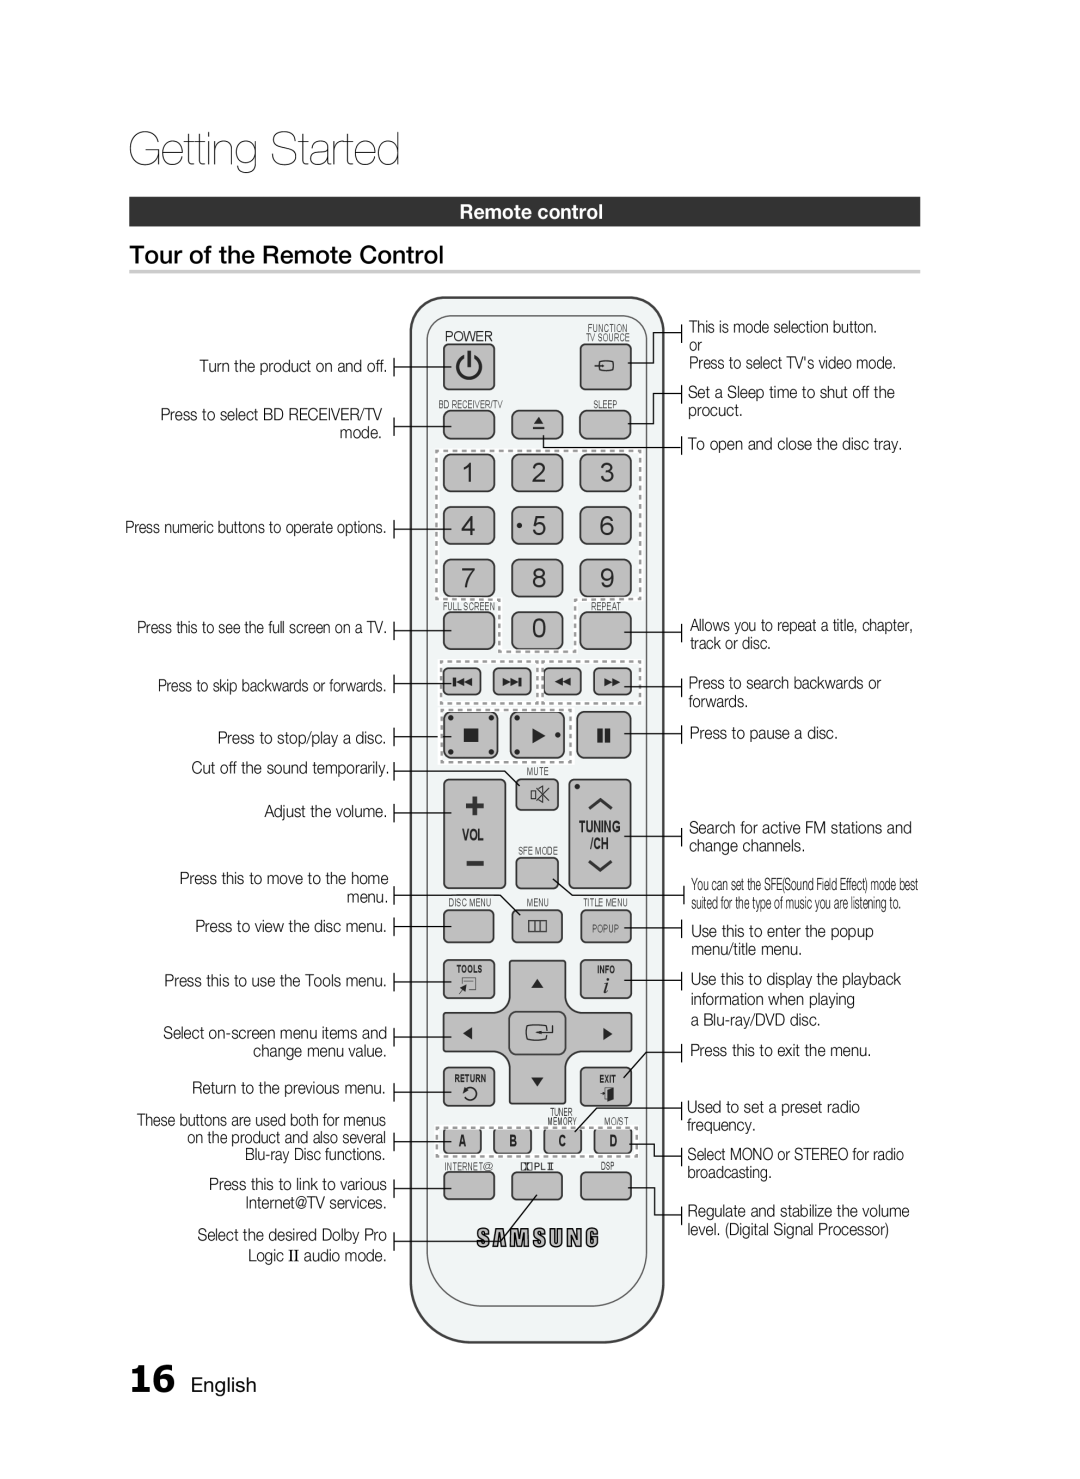 Samsung AH68-02255S, HT-C6530 user manual Tour of the Remote Control, Remote control, Getting Started 